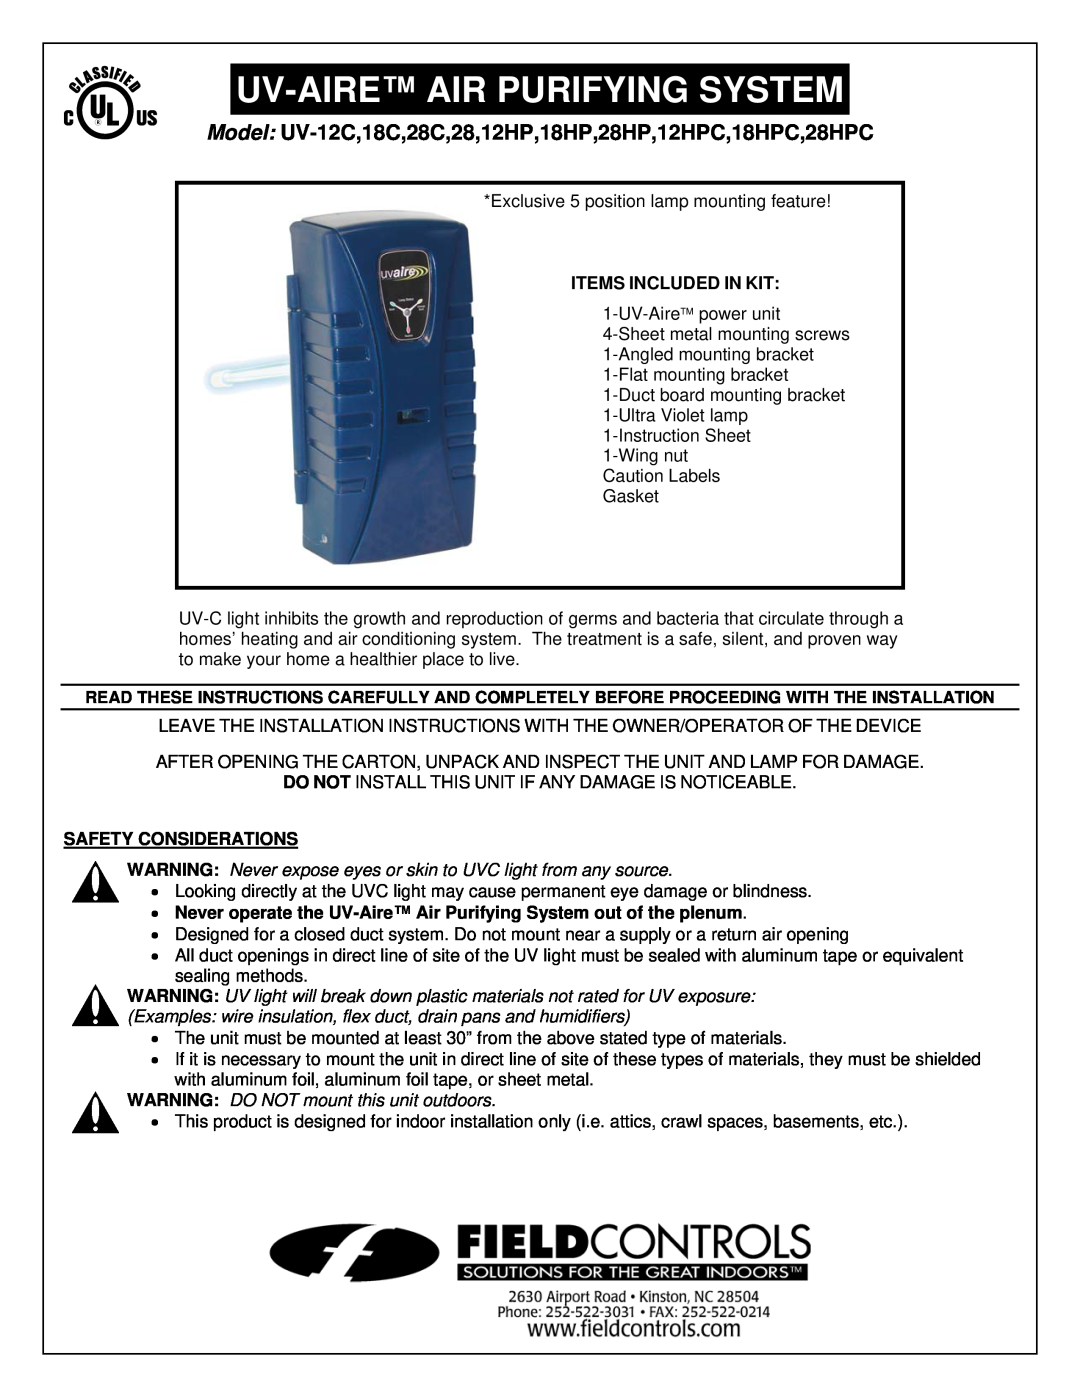 Field Controls UV-28C installation instructions Items Included In Kit, Safety Considerations, Uv-Aireair Purifying System 